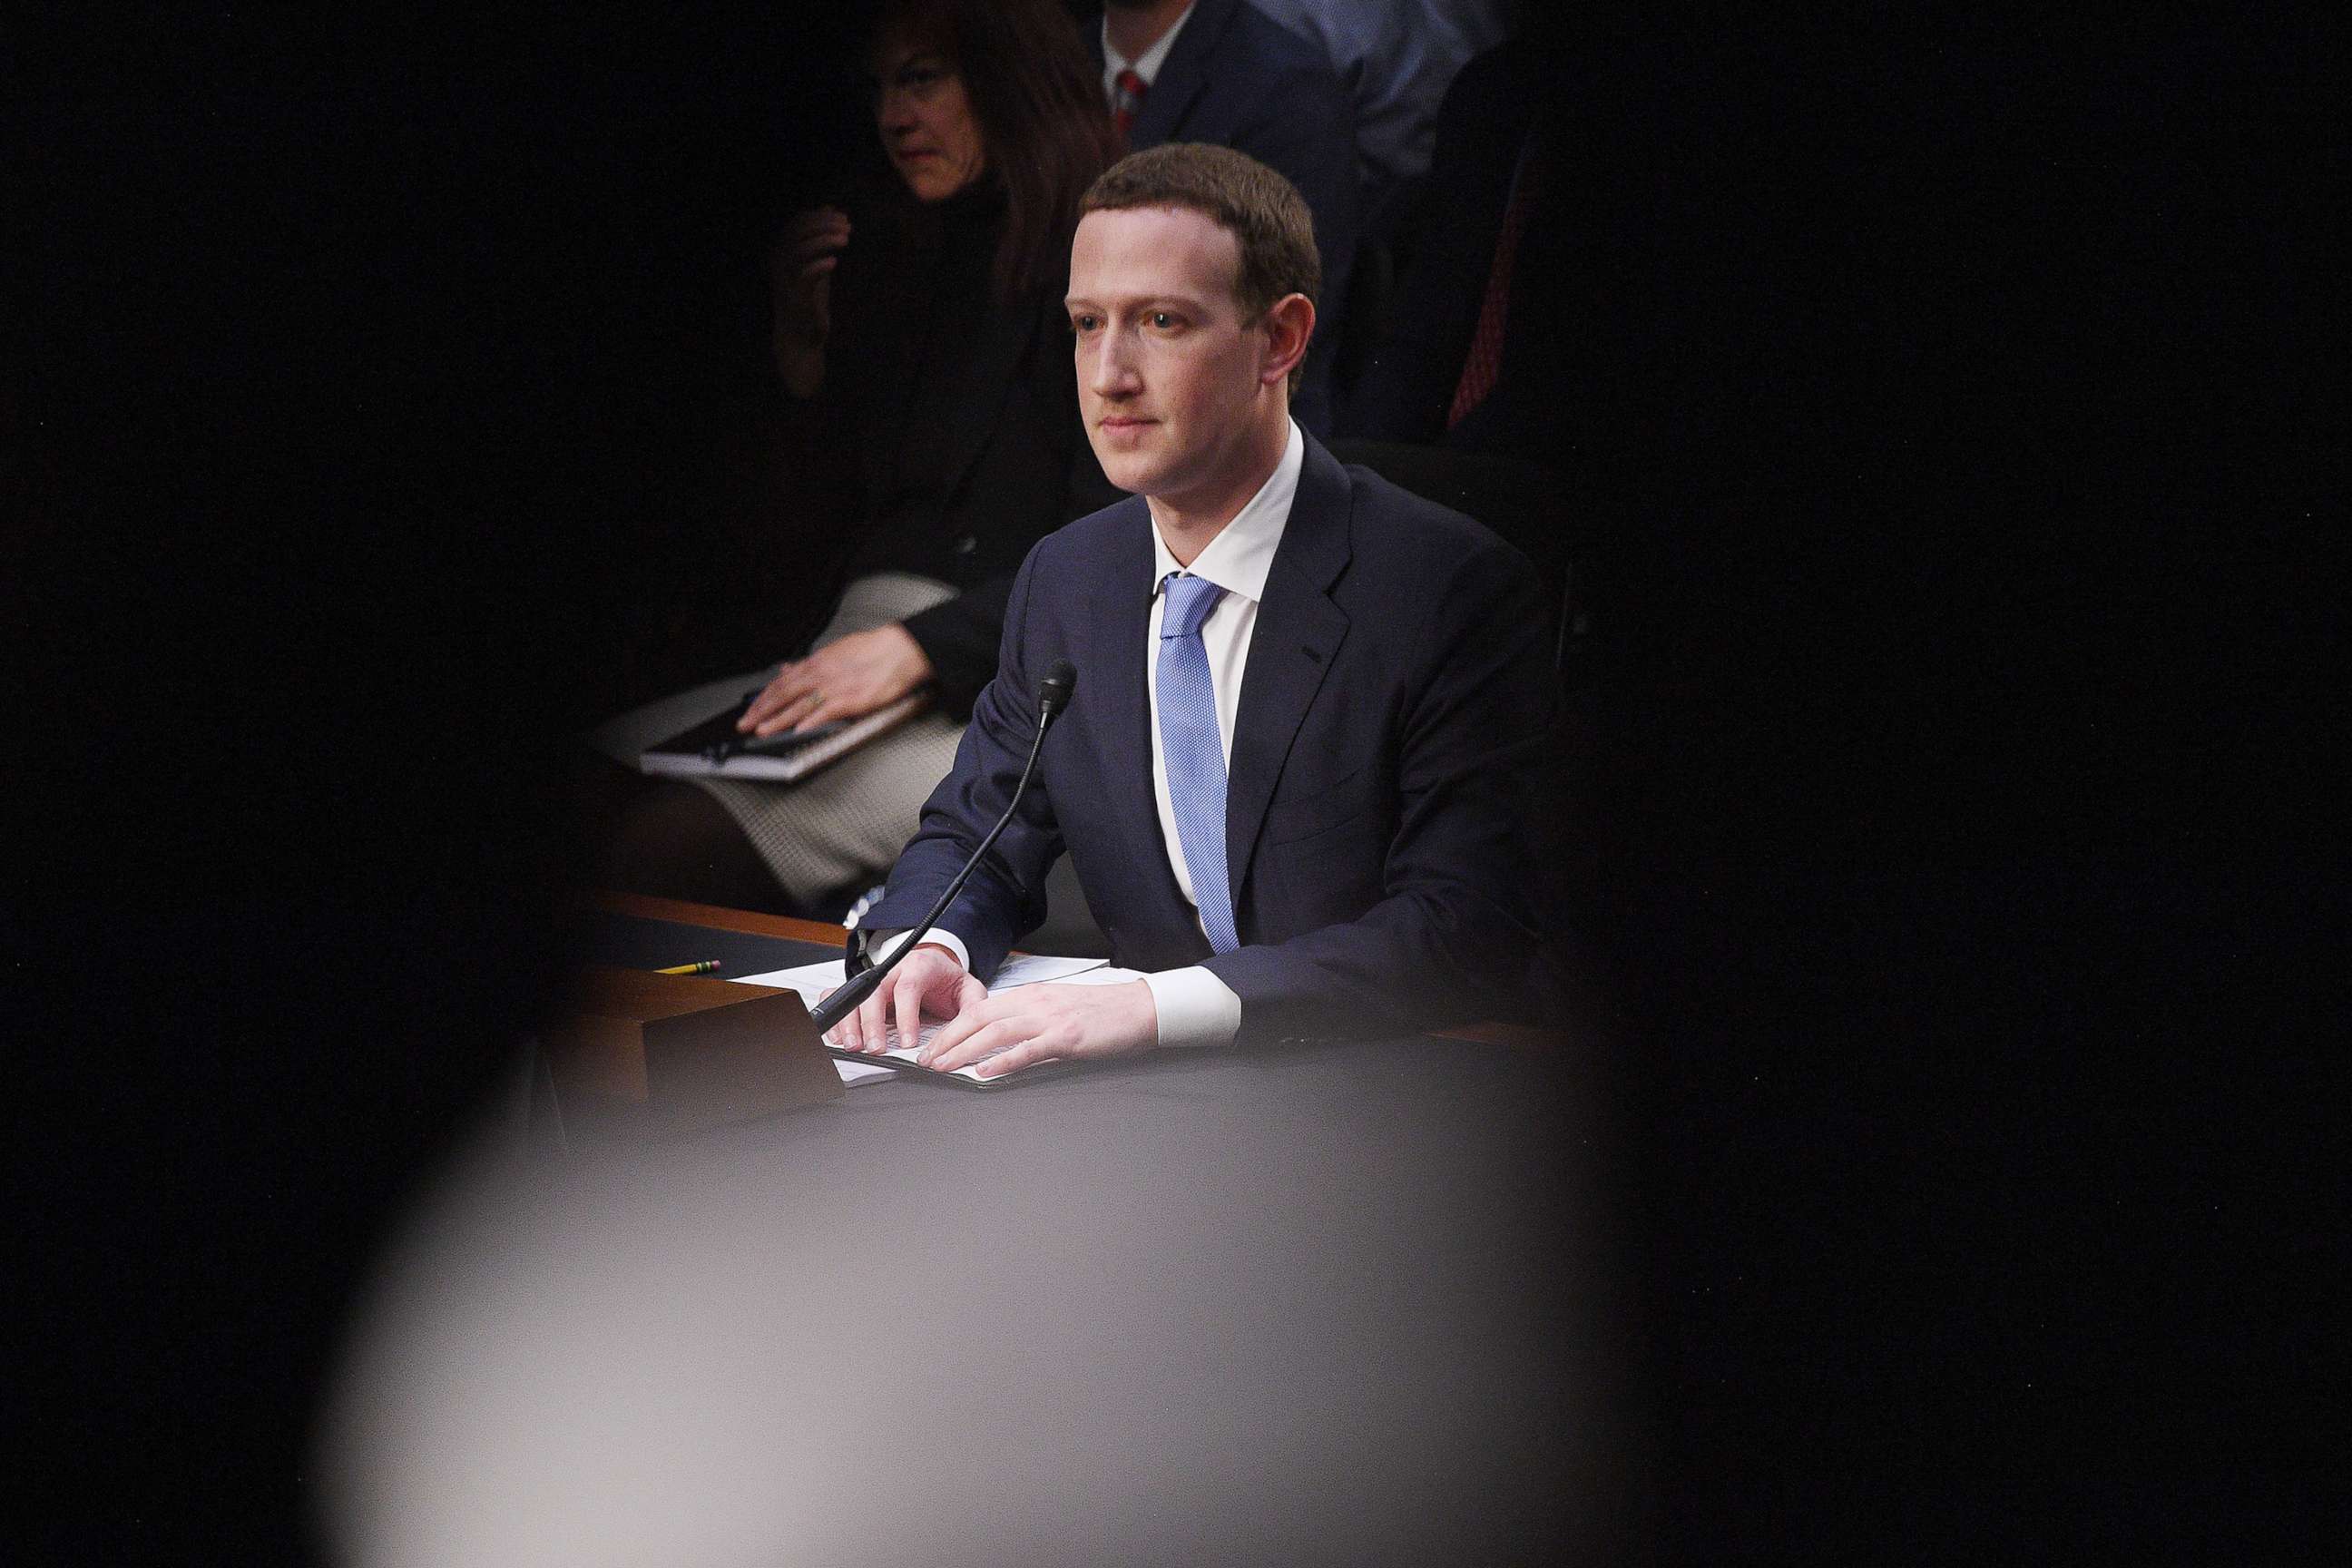 PHOTO: Facebook founder and CEO Mark Zuckerberg testifies during hearing about Facebook on Capitol Hill in Washington, D.C., April 10, 2018.